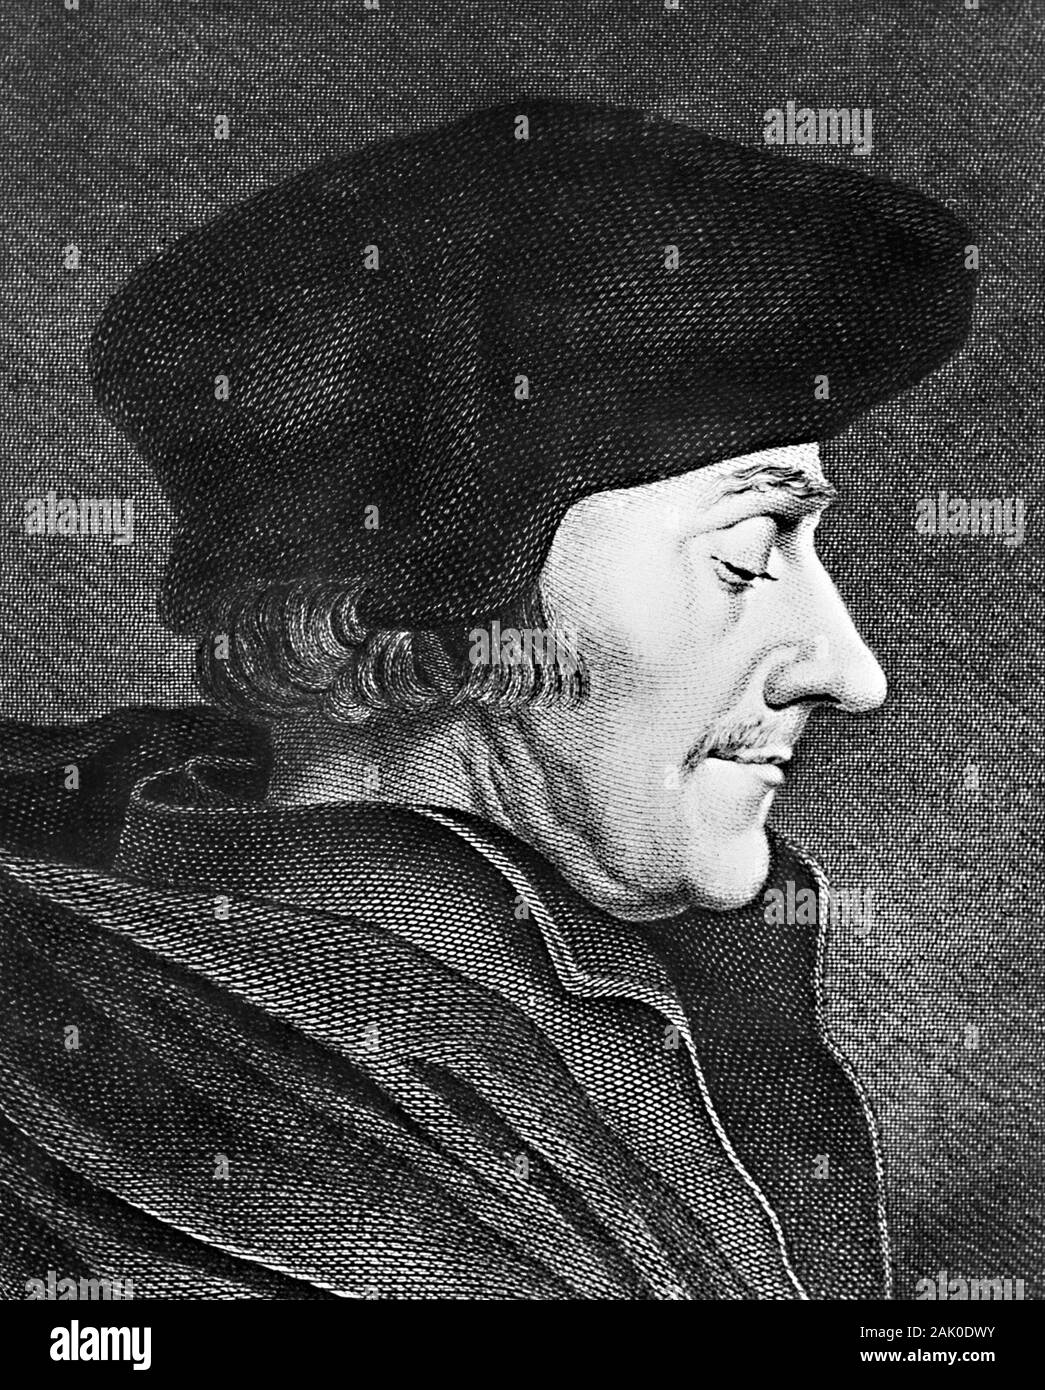 Engraving of Desiderius Erasmus Roterodamus (1466-1536), usually referred to as Erasmus of Rotterdam or simply Erasmus. Erasmus was a Dutch philosopher, Bible translator, and Christian humanist widely considered one of the greatest scholars of the northern Renaissance. Stock Photo